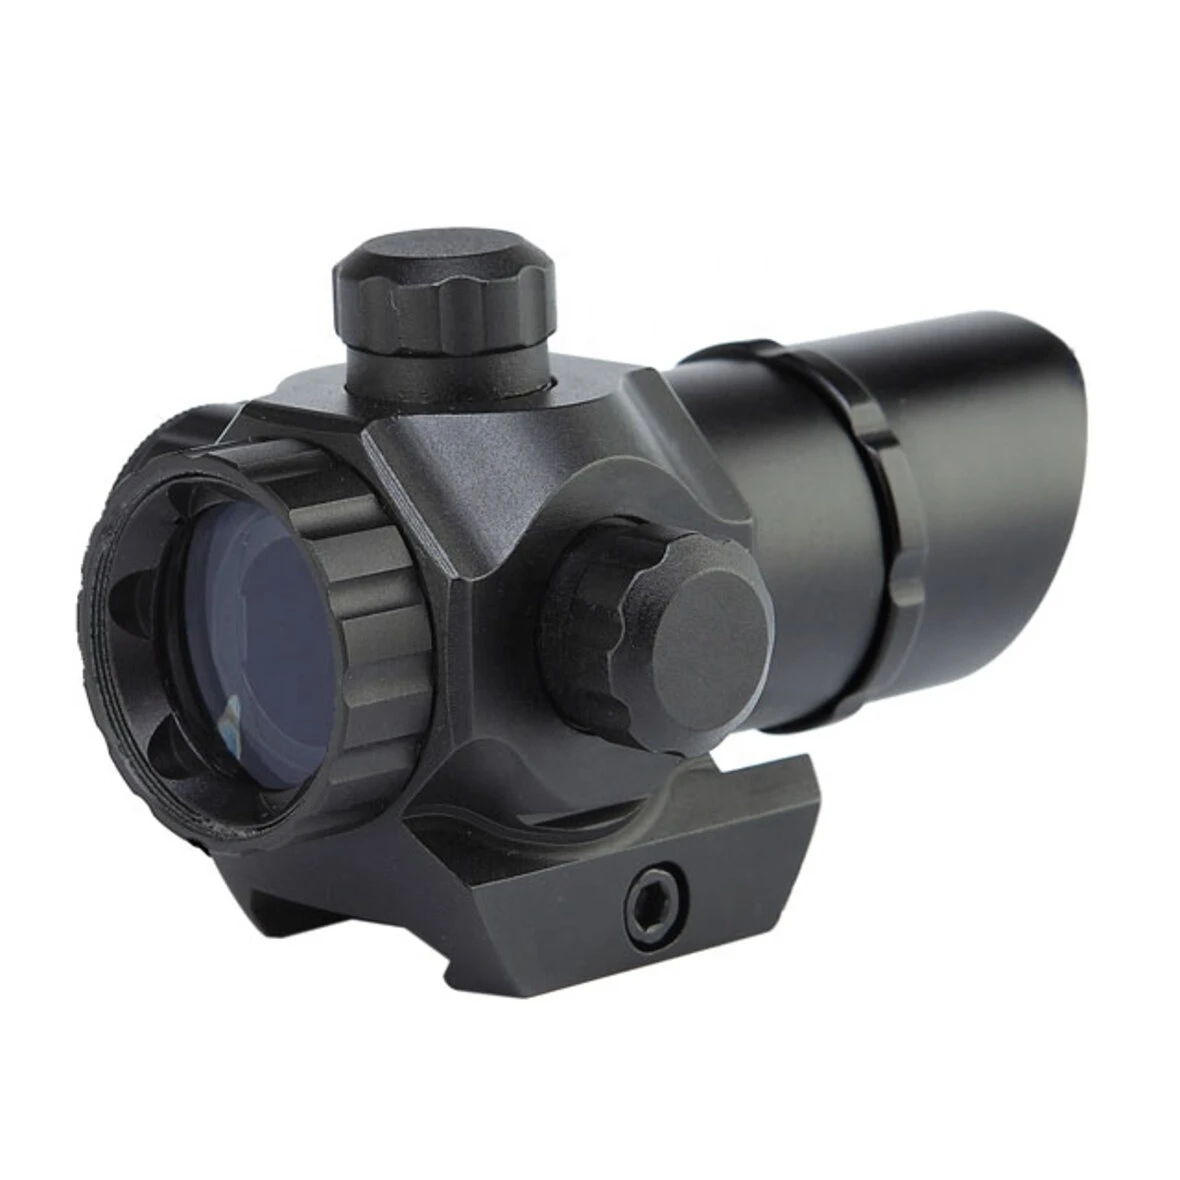 Riflescopes red dot sight 1x33mm electronic red and green dot sight tactical hunting gun sights red dot